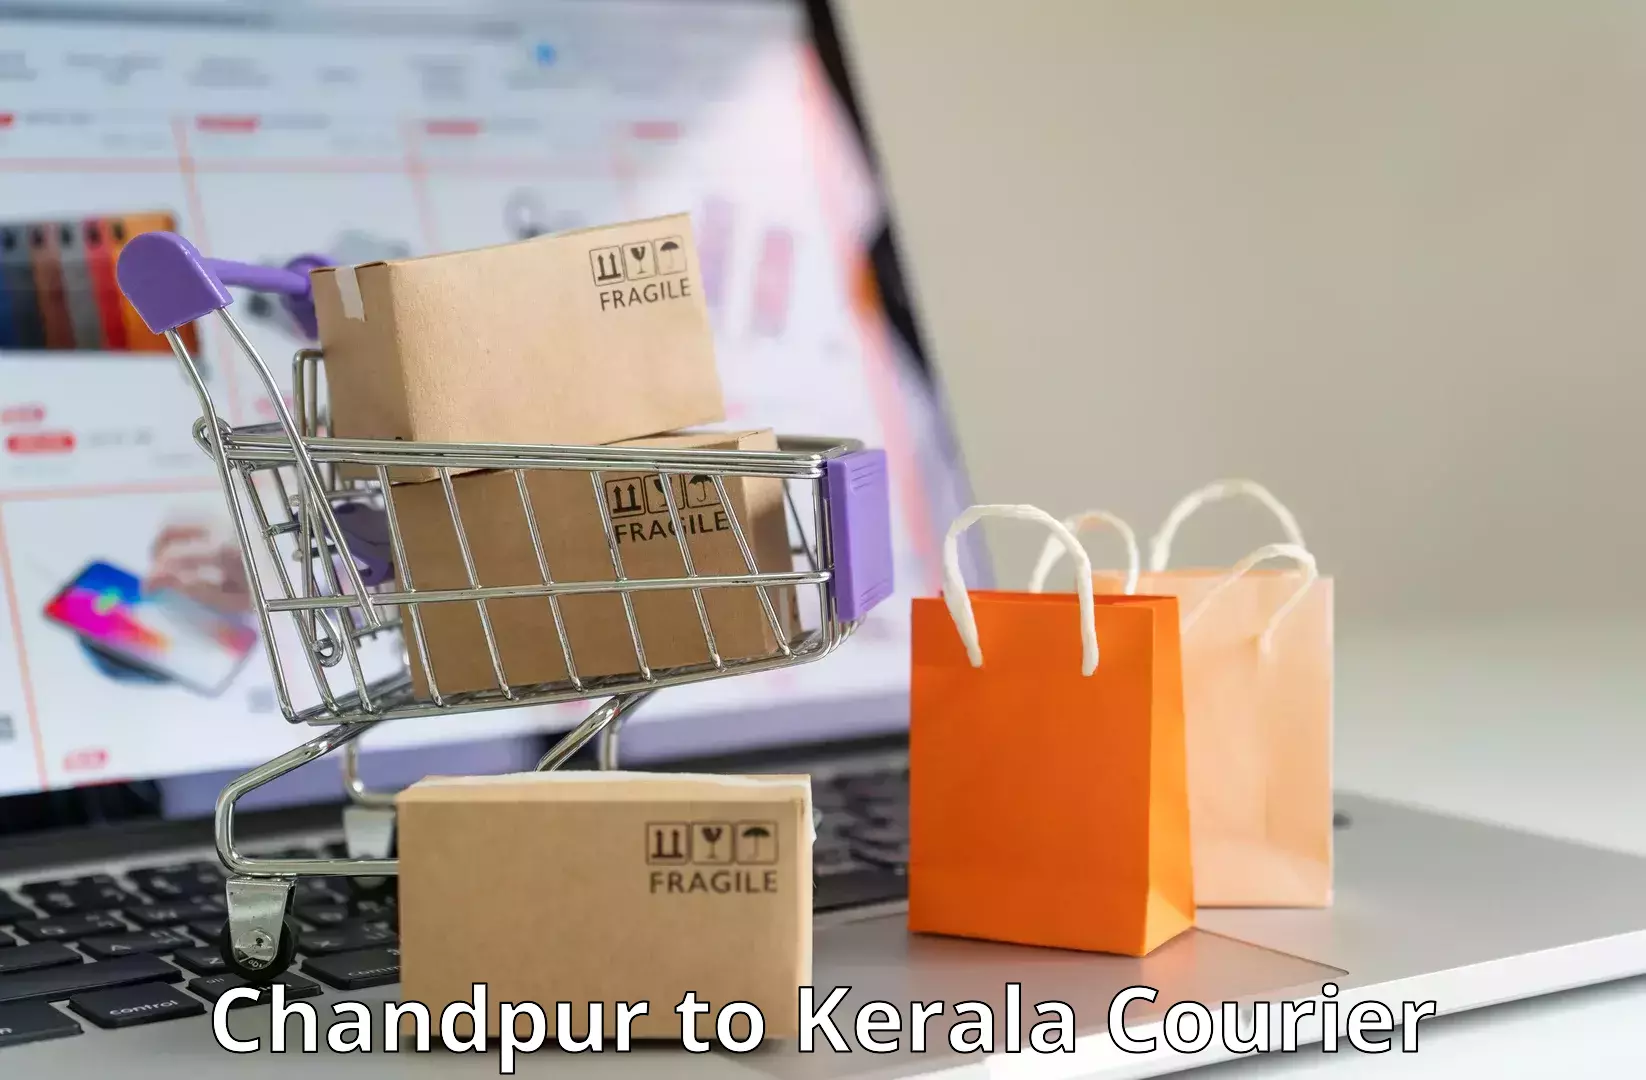 Advanced shipping services Chandpur to Ernakulam